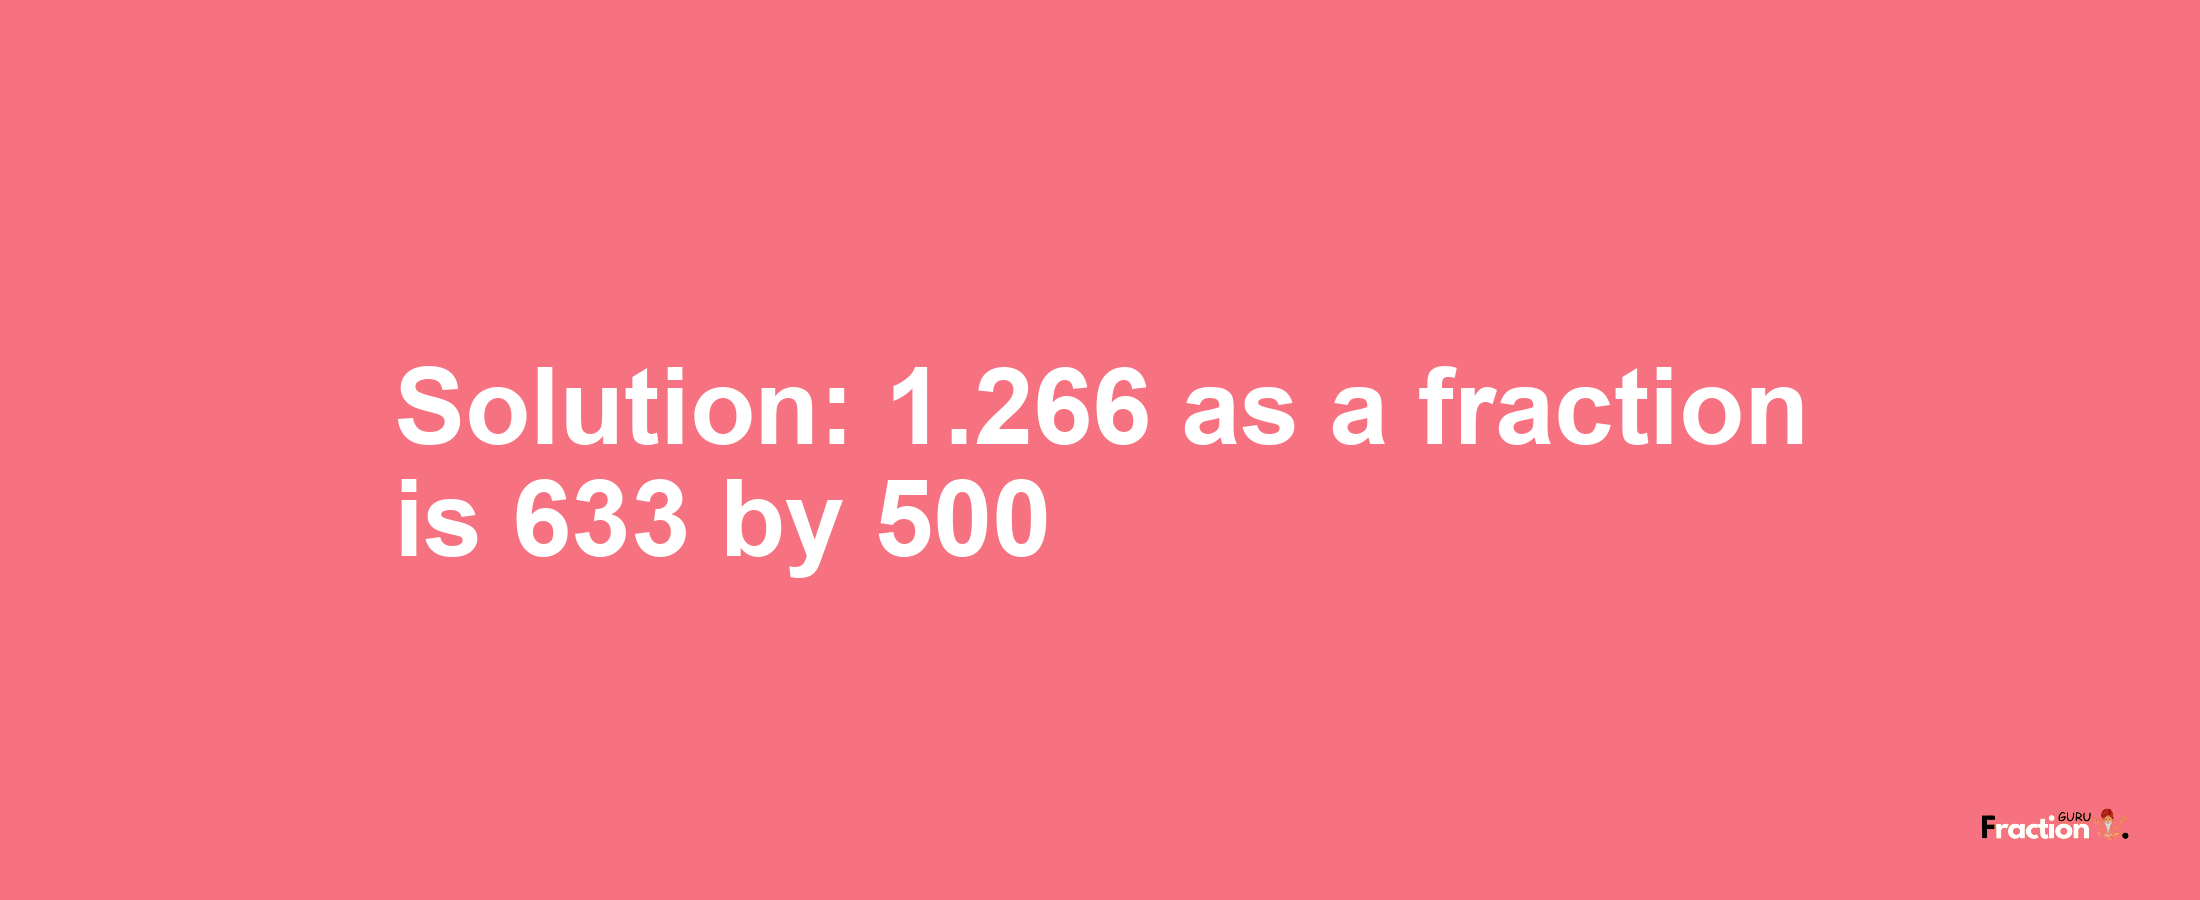 Solution:1.266 as a fraction is 633/500